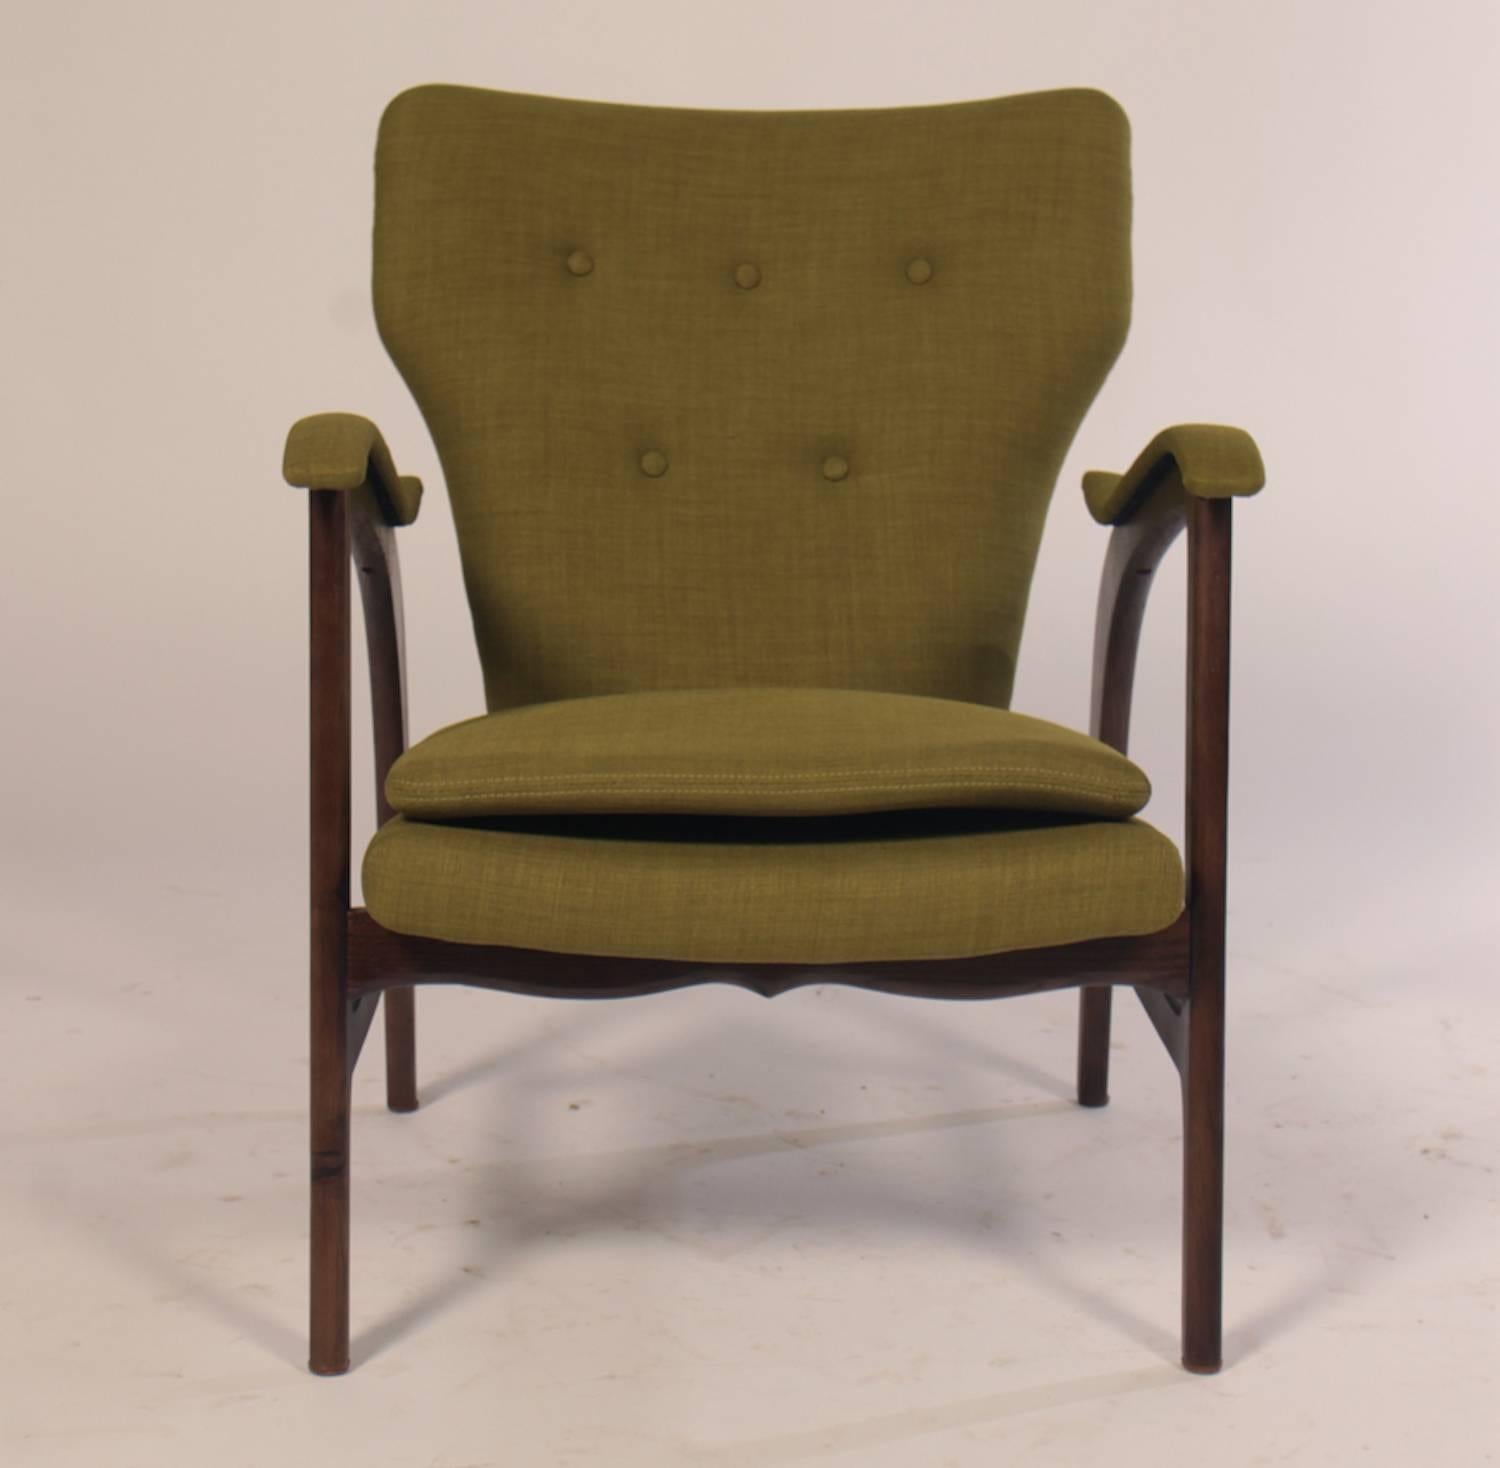 A pair of Mid-Century Modern  club chairs / armchairs with green upholstered fabric. 